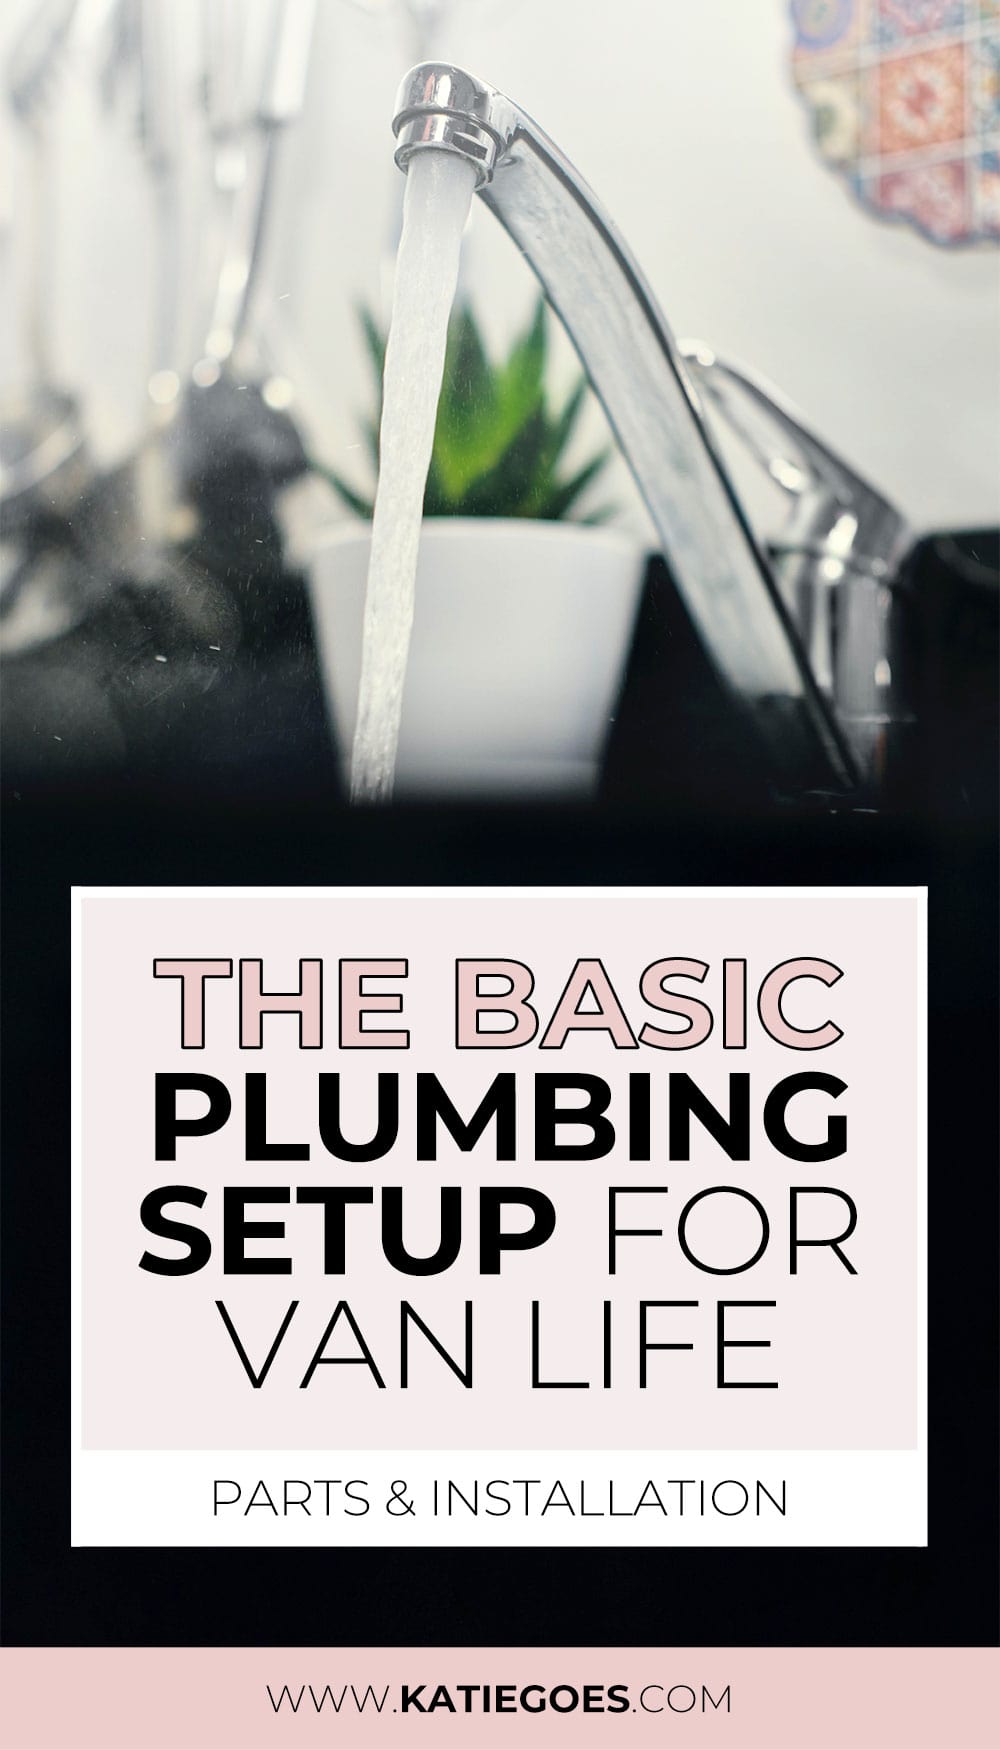 Simple Water System for Van Life: The Complete Guide to a Basic Plumbing Setup